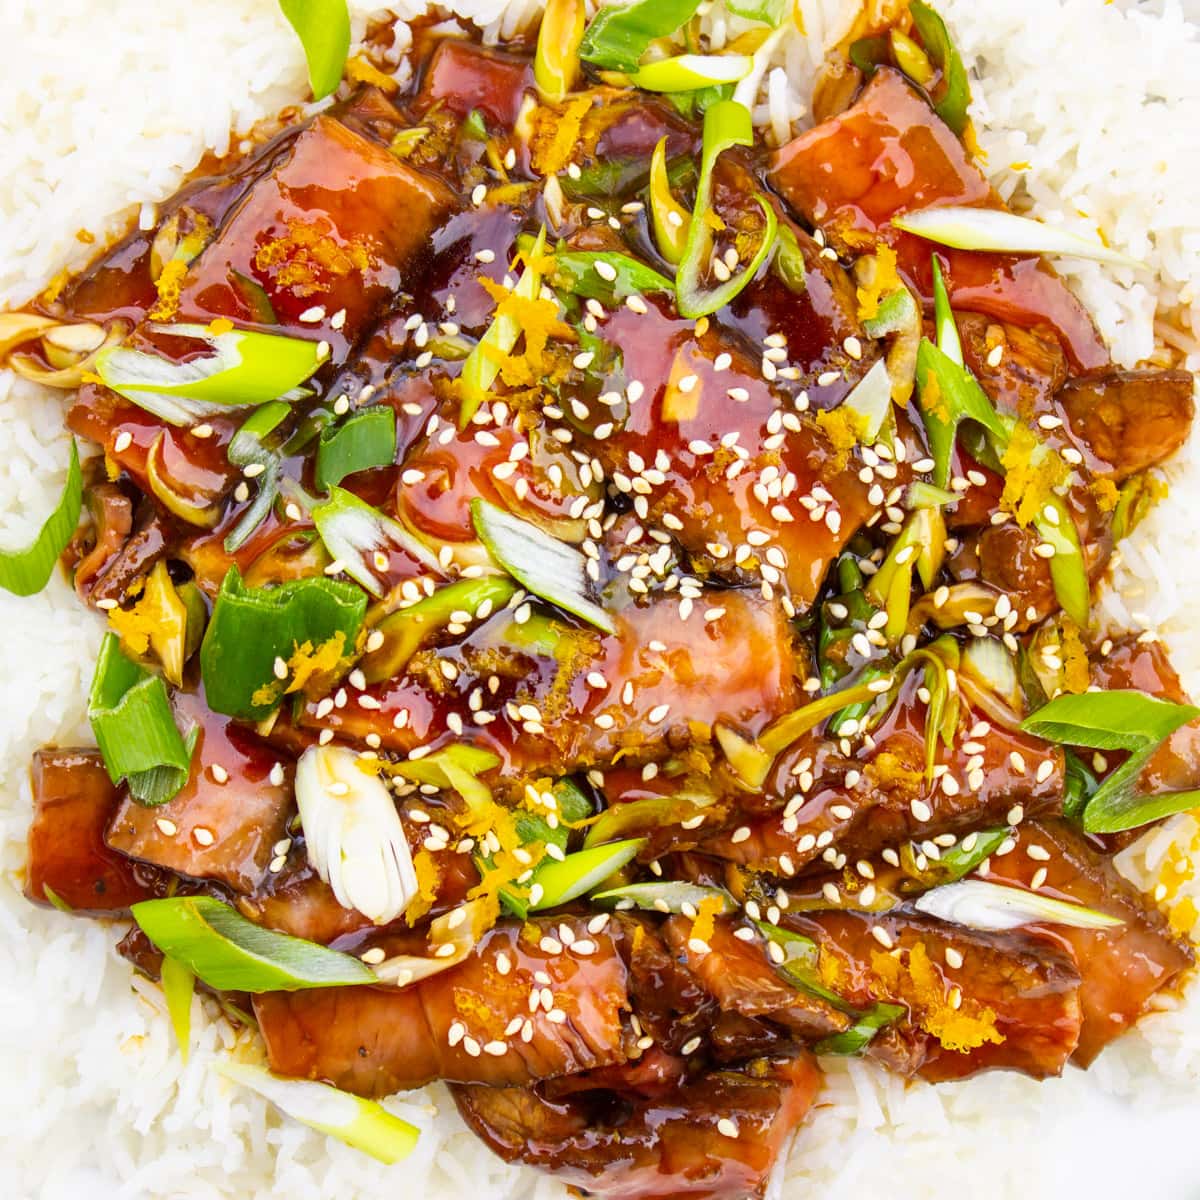 mongolian beef with green onions garnished with sesame seeds over rice in plate.